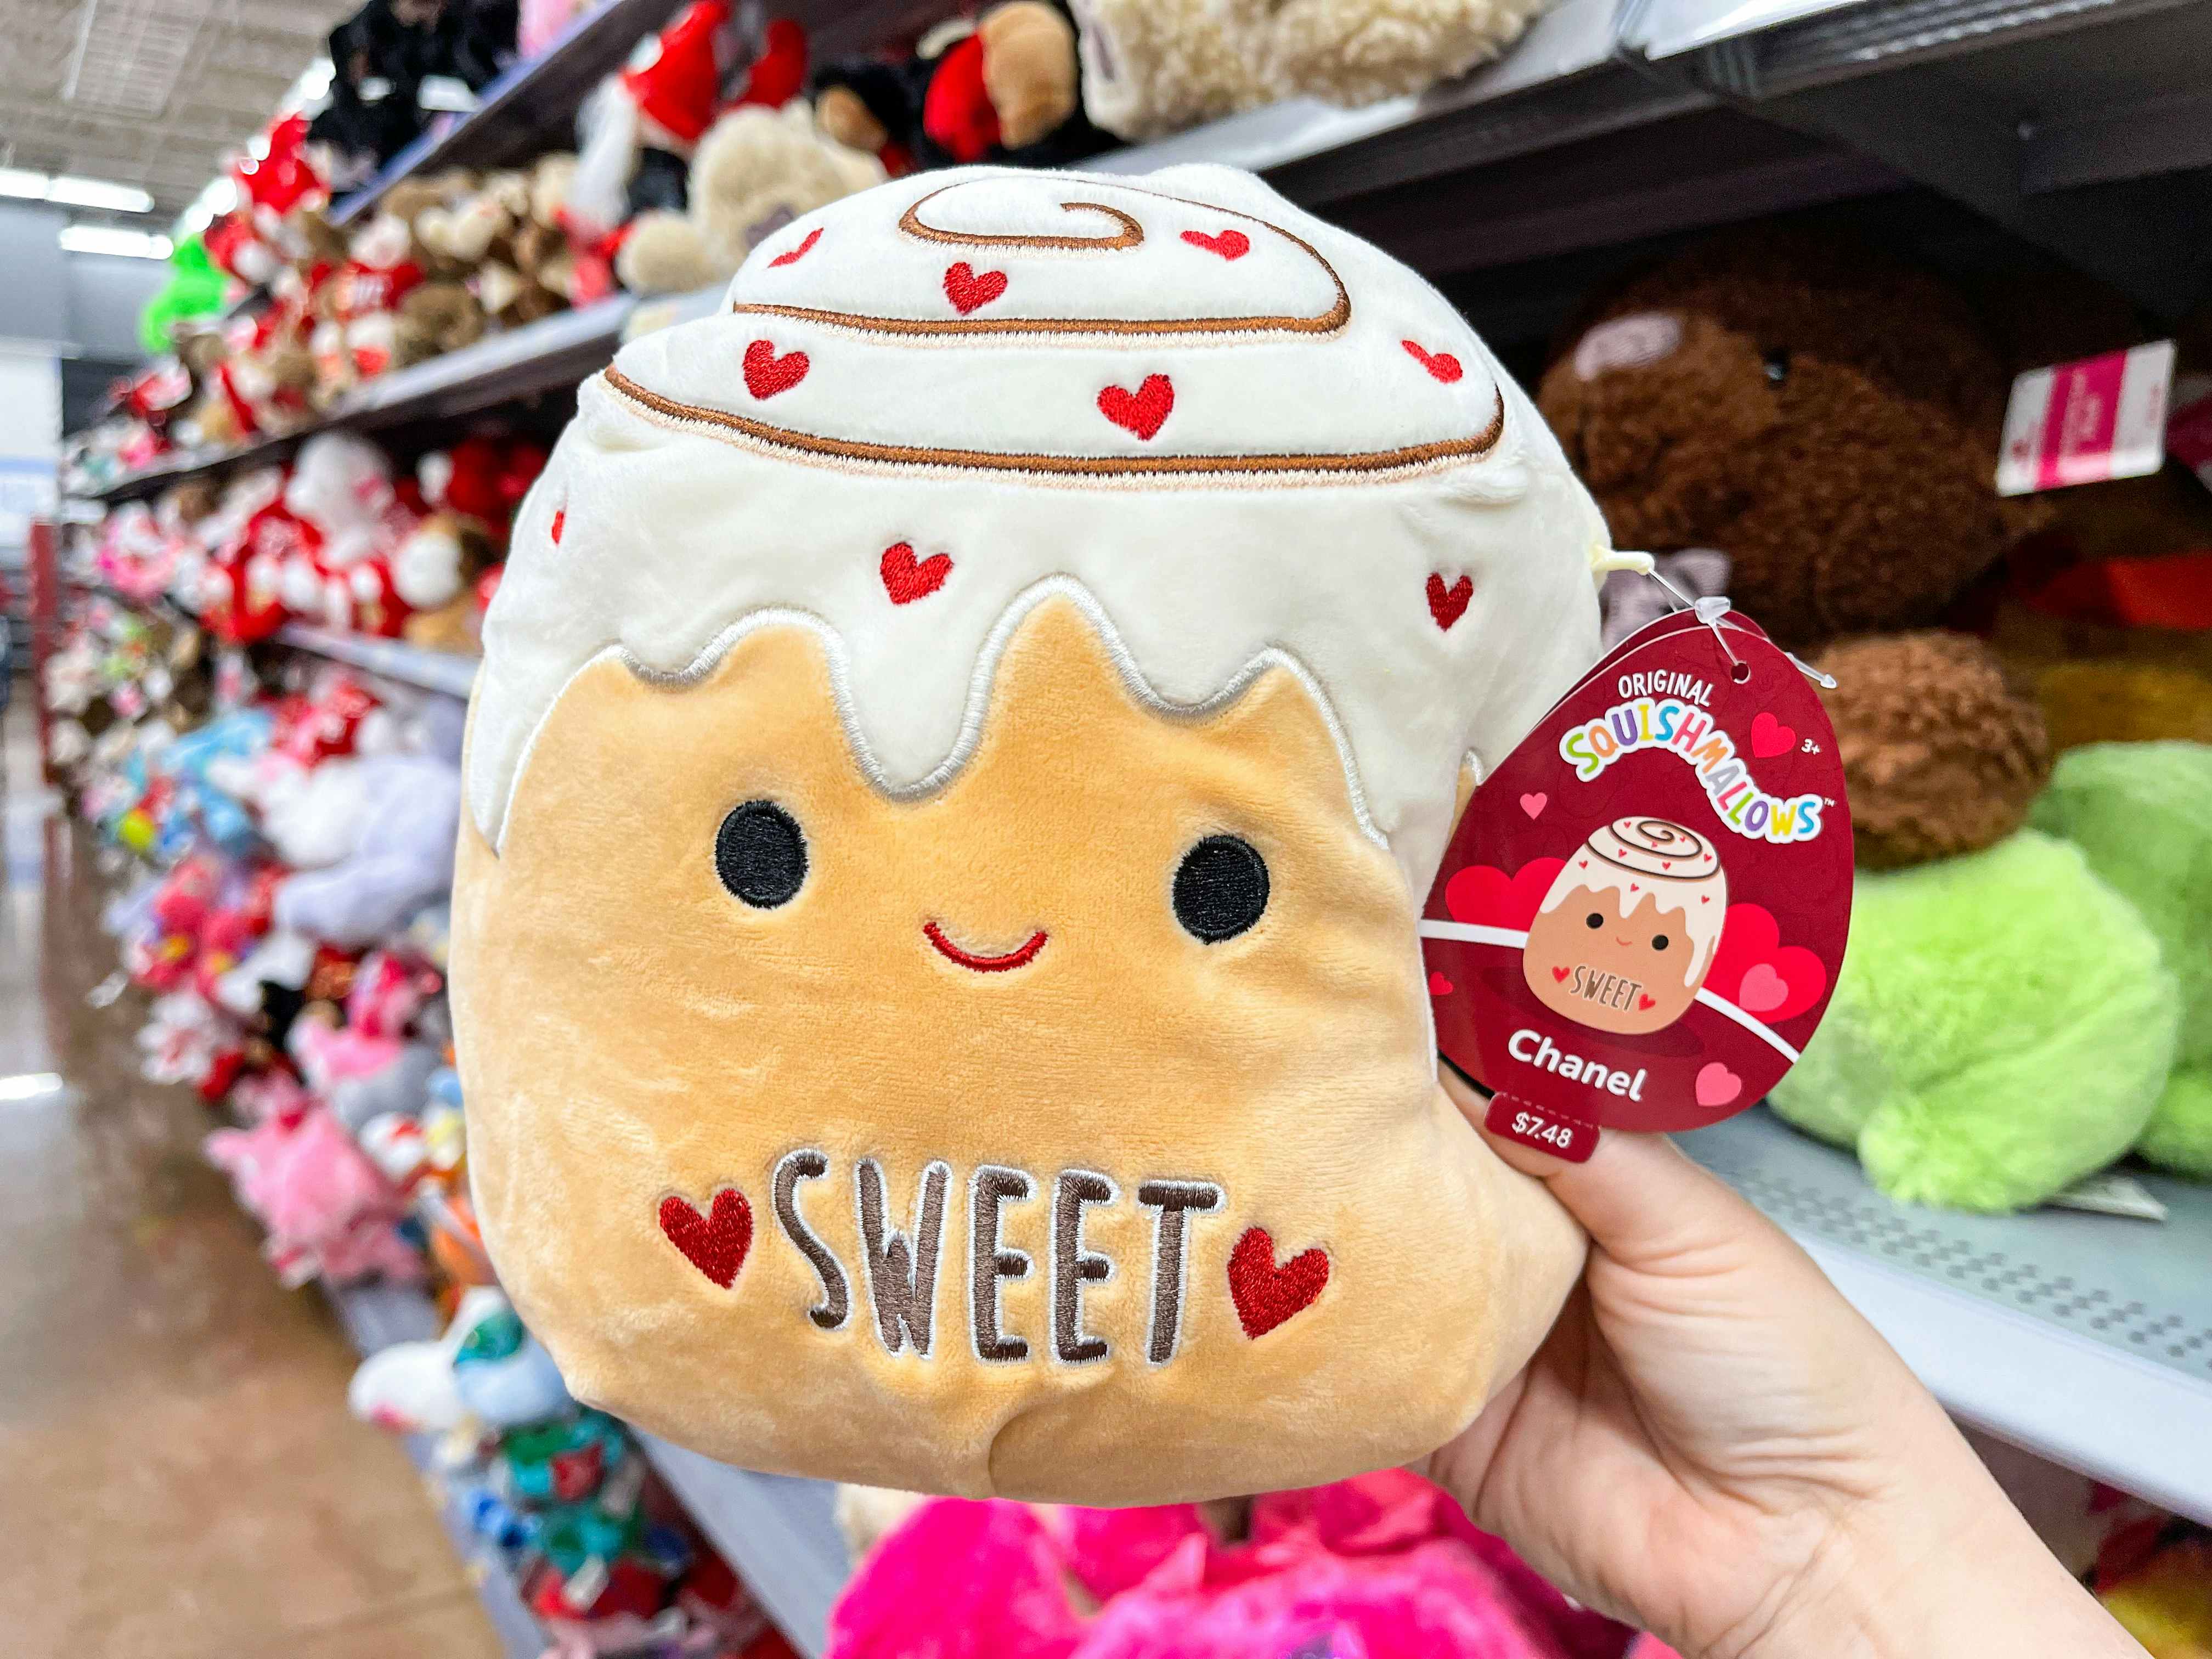 Someone holding up a Cinnamon Roll Squishmallow that says "Sweet" on the tummy.